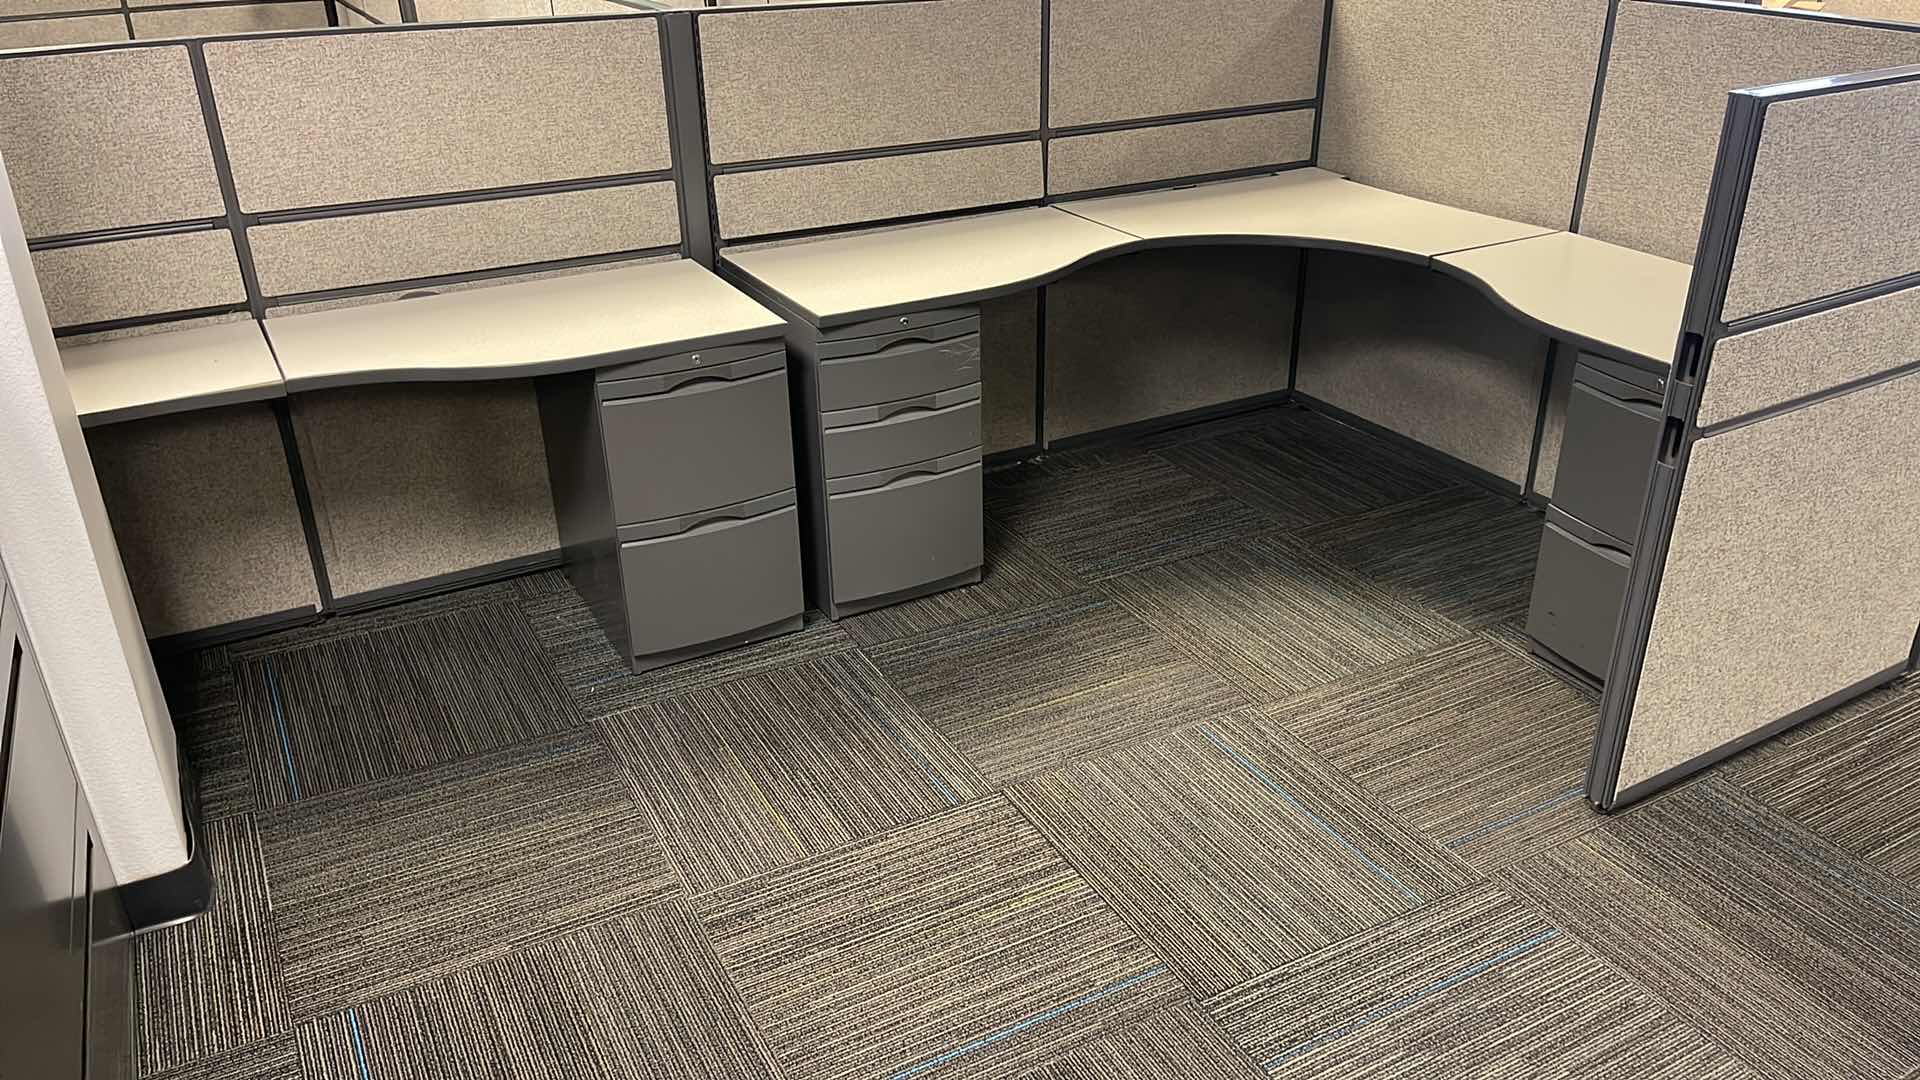 Photo 2 of 3 PC CUBICLE SET W 5 DRAWER MEDAL BASE DESKS 2 CUBICLES 76” X 76” H50” 1 CUBICLE 12’ X 76” H50”(BUYER TO DISASSEMBLE & REMOVE FROM 2ND STORY OFFICE BUILDING W ELEVATOR)